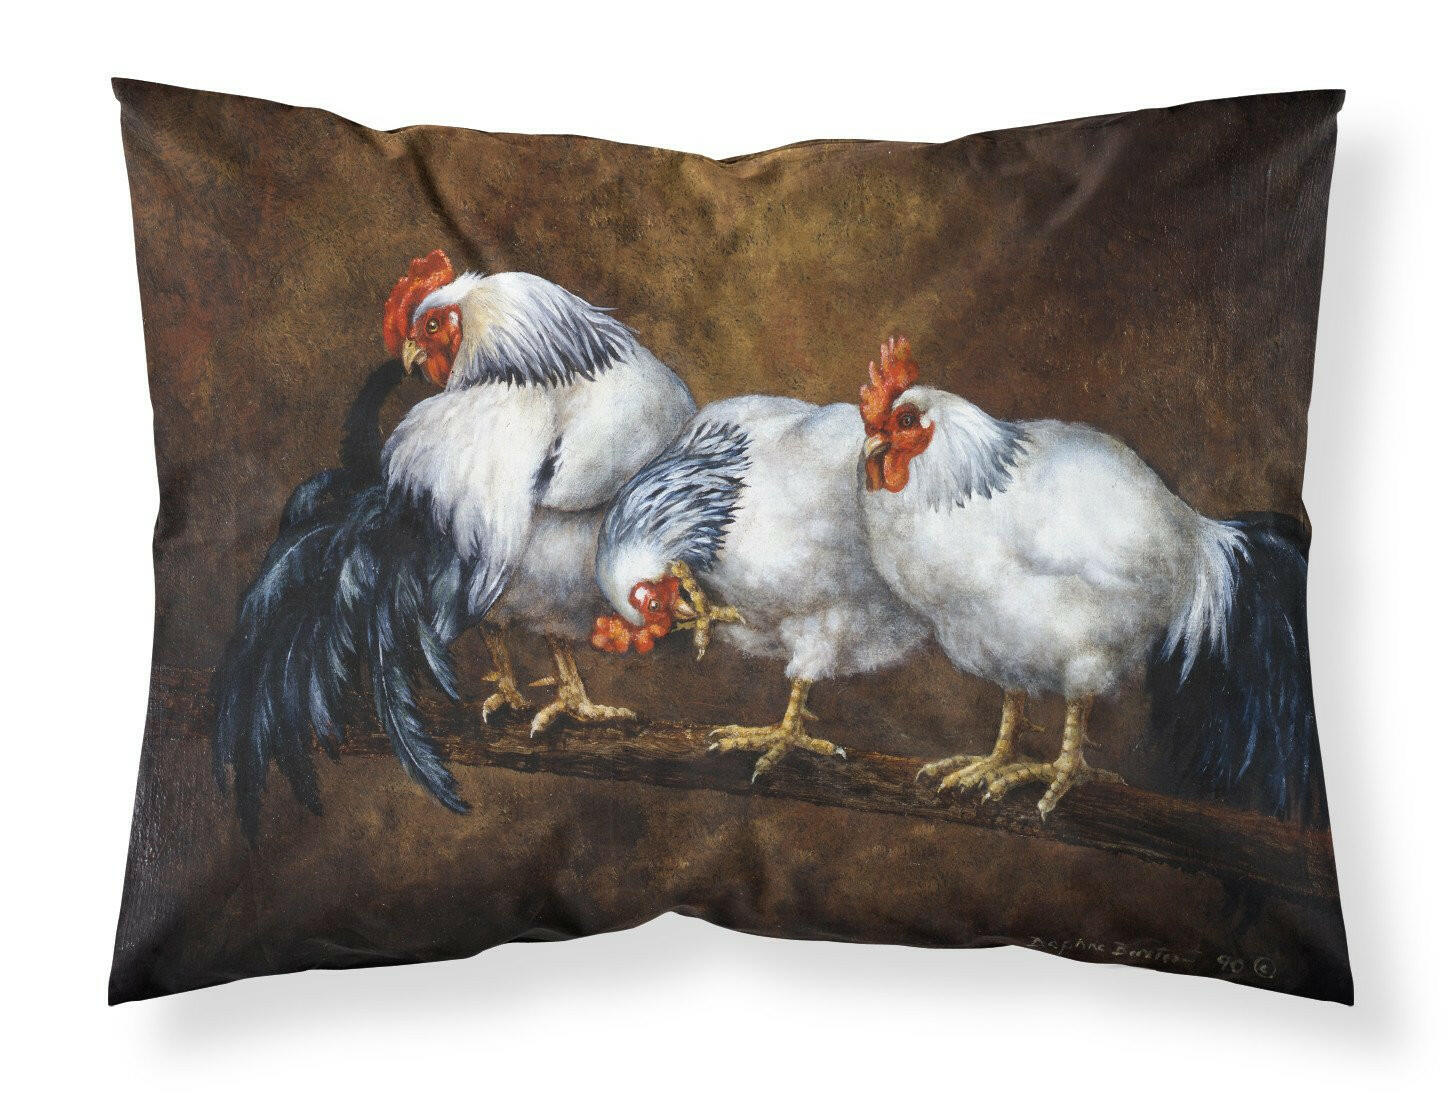 Roosting Rooster and Chickens Fabric Standard Pillowcase BDBA0081PILLOWCASE by Caroline's Treasures